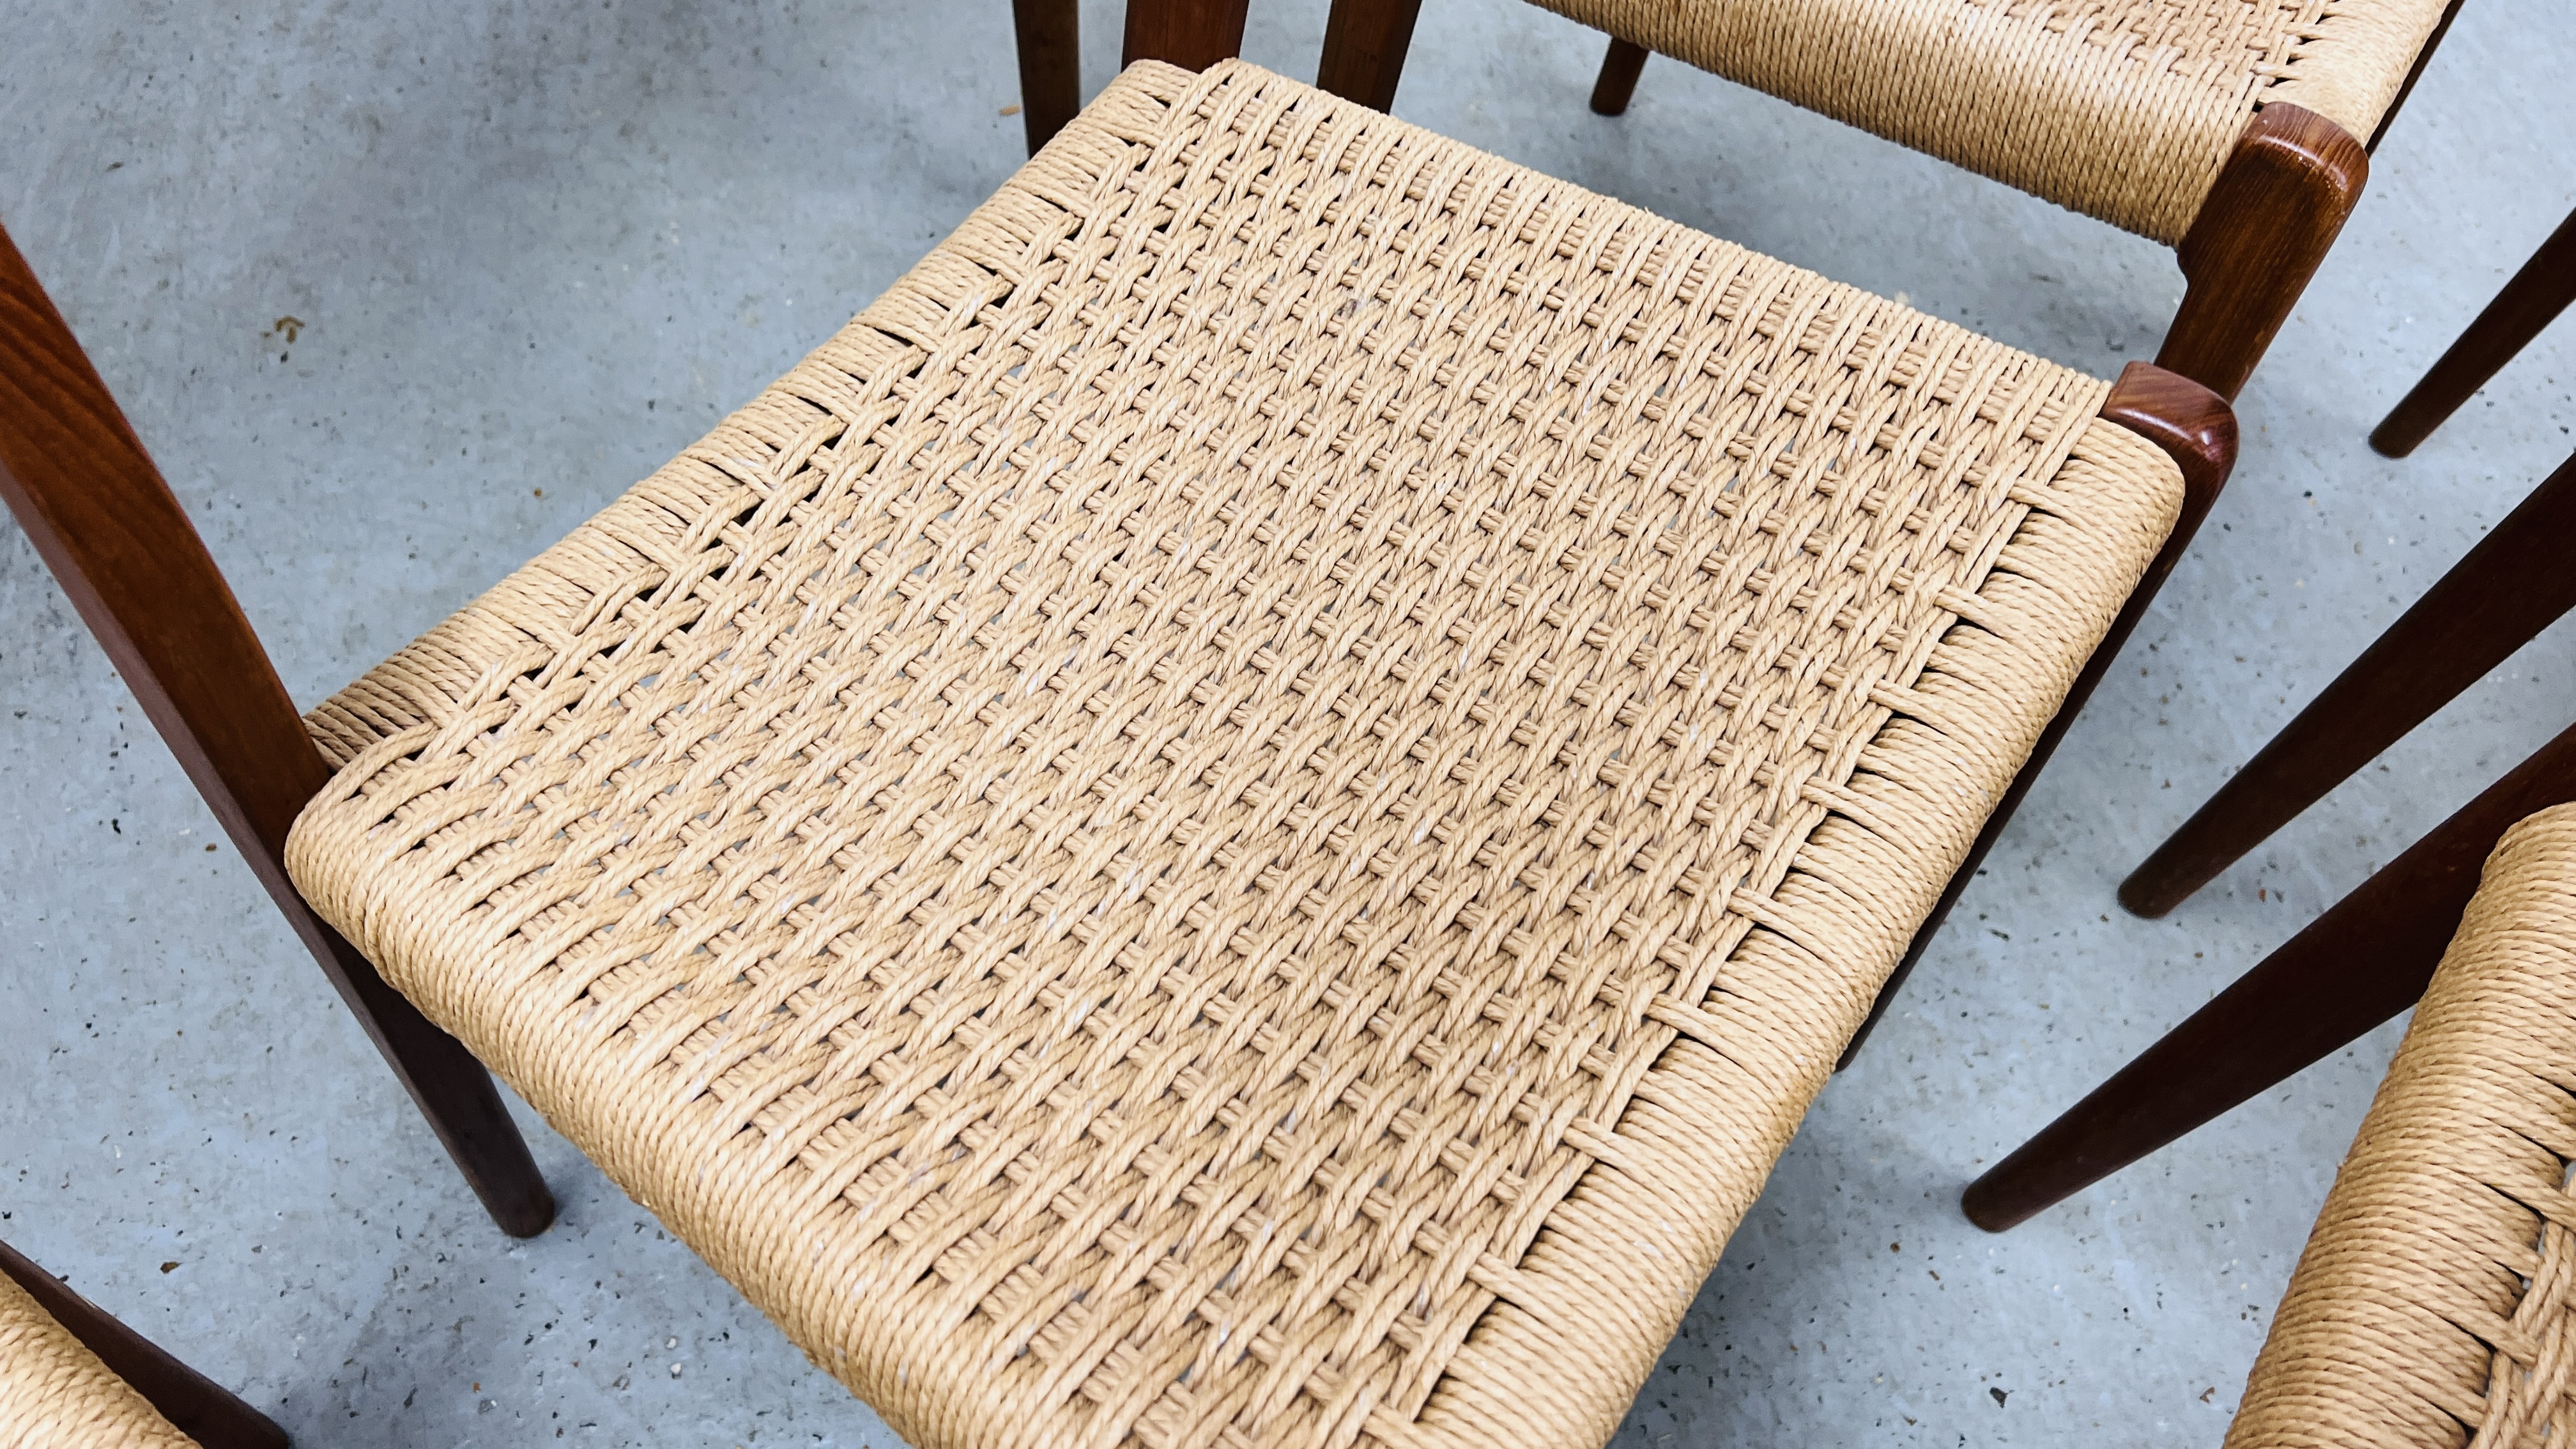 SET OF EIGHT J MOLLER DANISH TEAK DINING CHAIRS WITH WOVEN SISAL SEATS ALONG WITH A DRAWER LEAF - Image 29 of 48